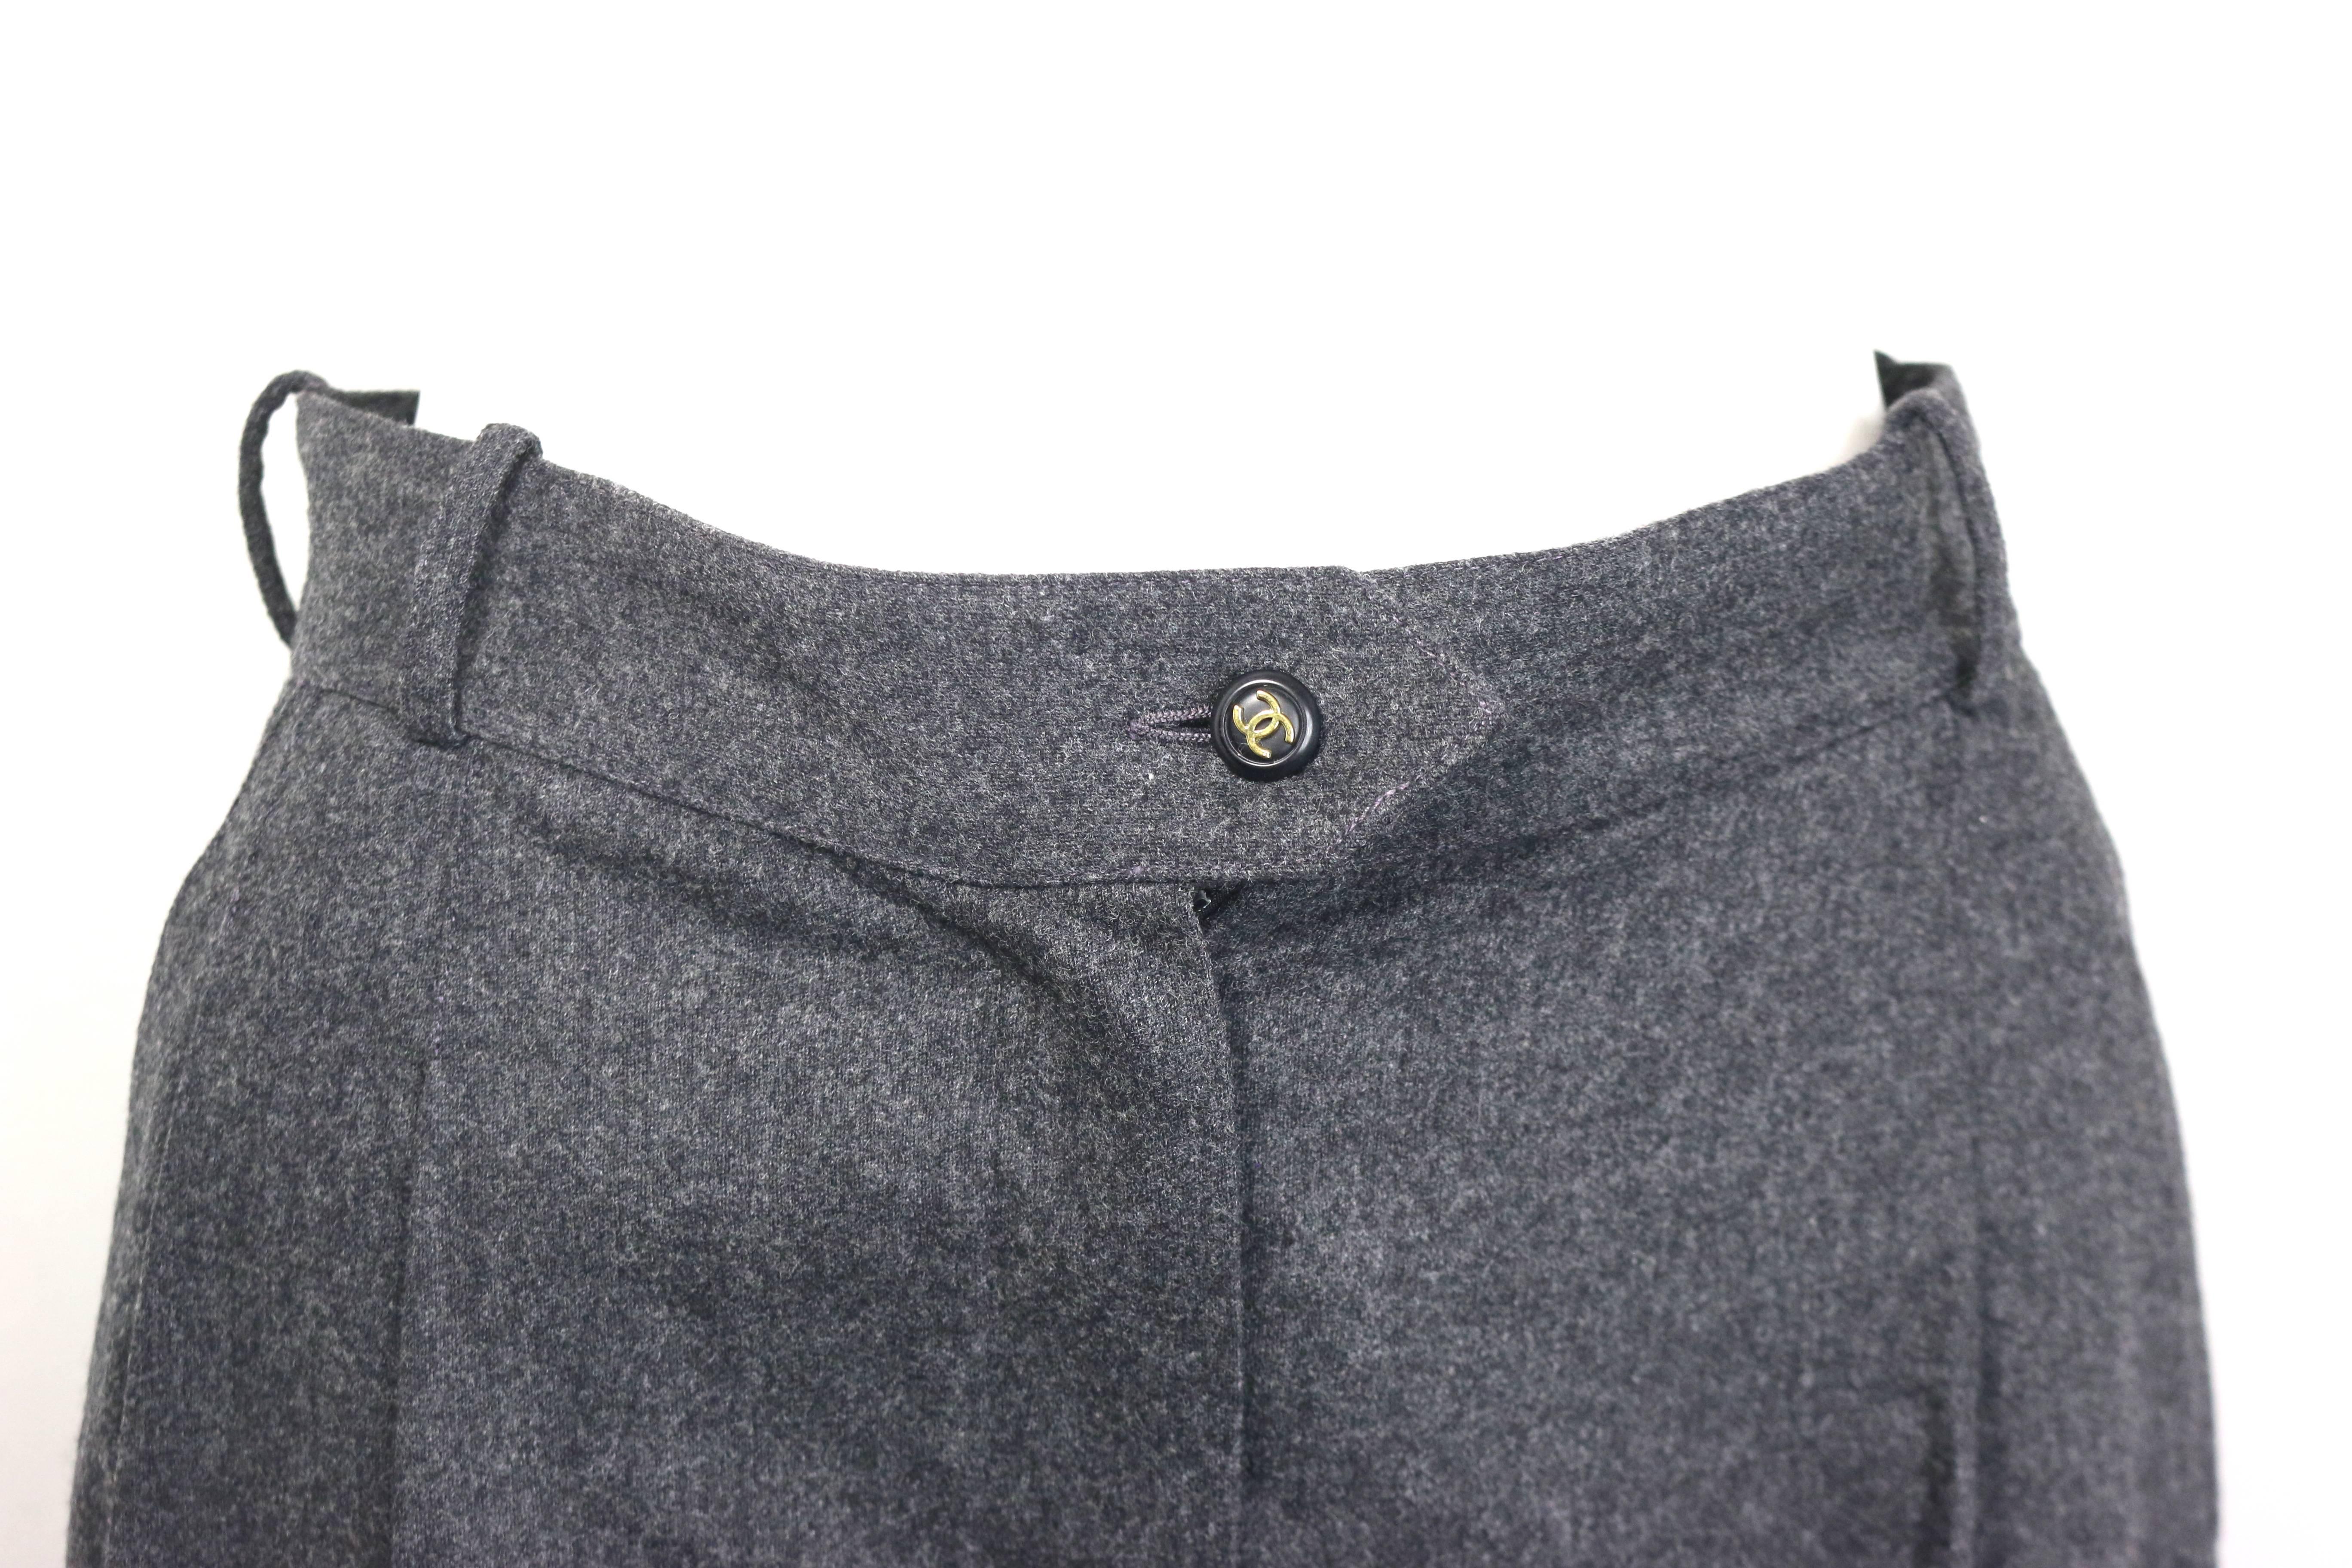 - Vintage 90s Chanel grey wool pants. 

- Wild legs cutting. 

- Black gold toned 